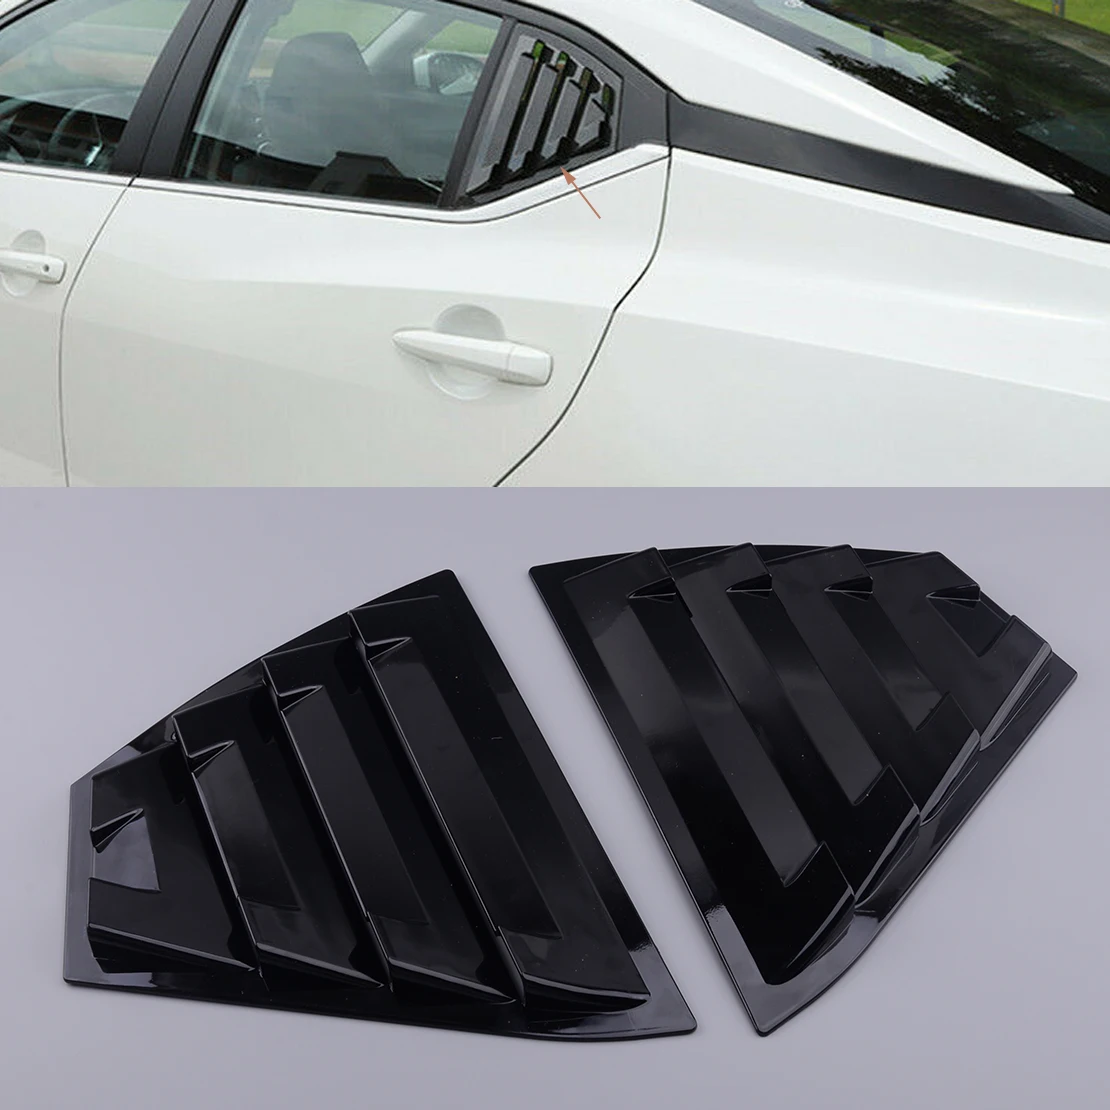 Gloss Black DXGTOZA 2PCS ABS Rear Side Window Louvers for 2019-2021 Nissan Altima,Racing Style Window Louvers Air Vent Louver Scoop Shades Cover 